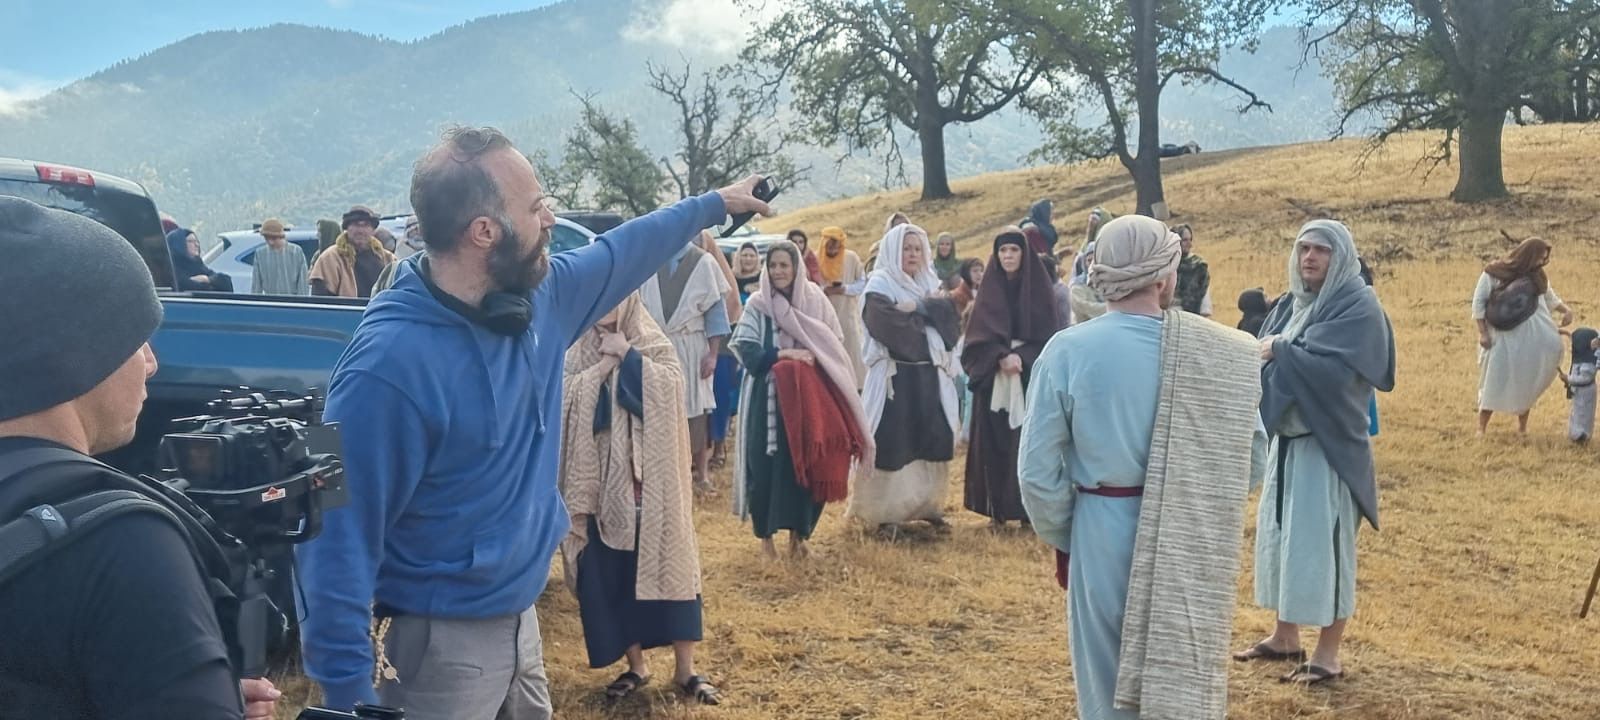 Eucharistic Miracles' movie begins filming, seeks extras and financial  support to complete project | Catholic News Agency